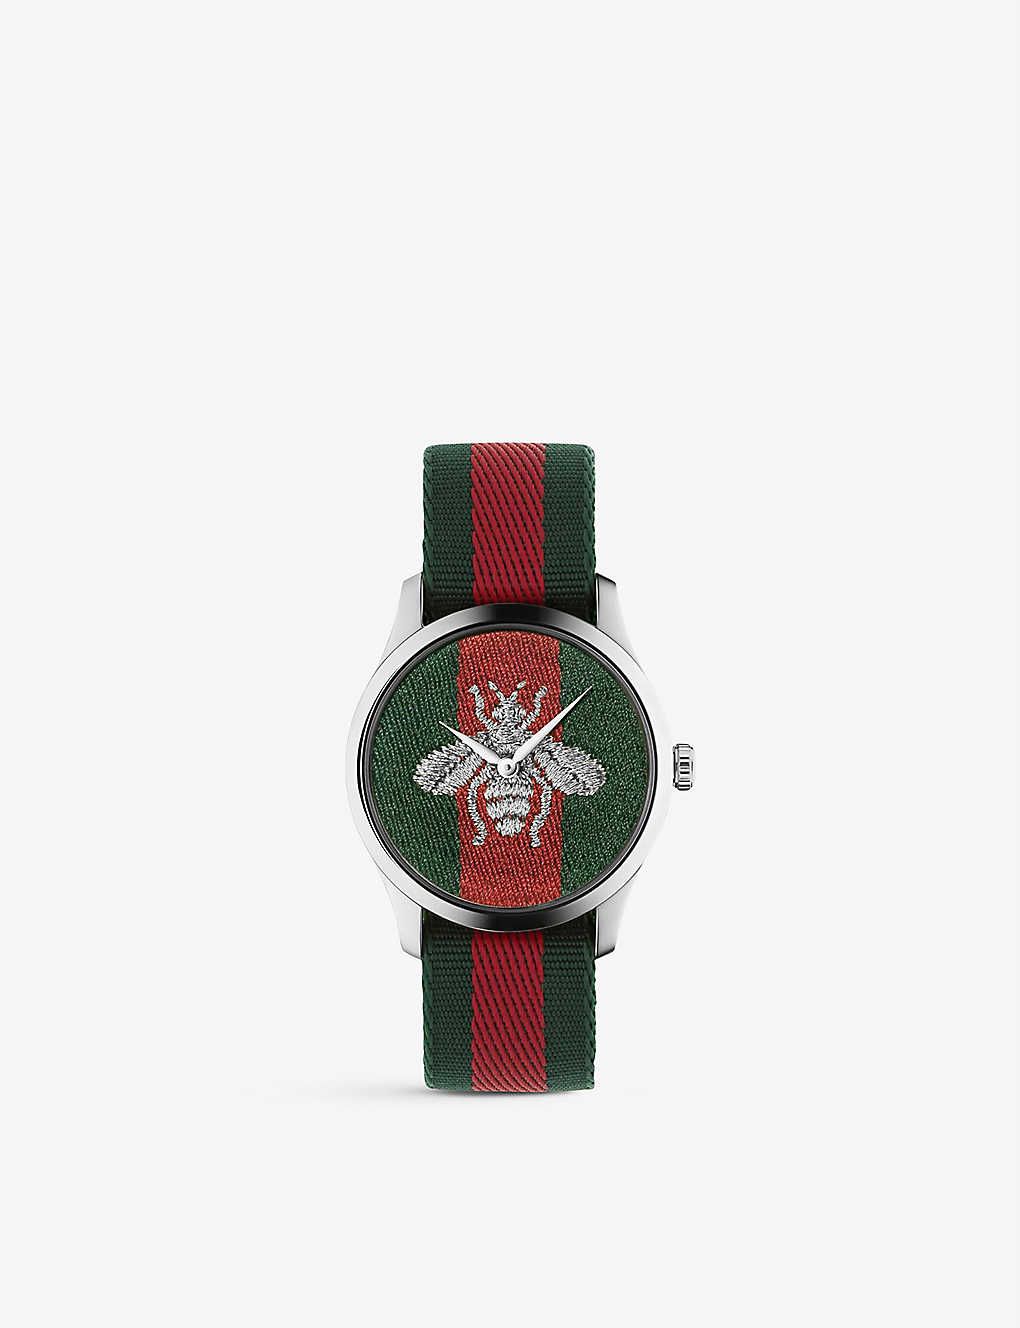 gucci watches black friday sale